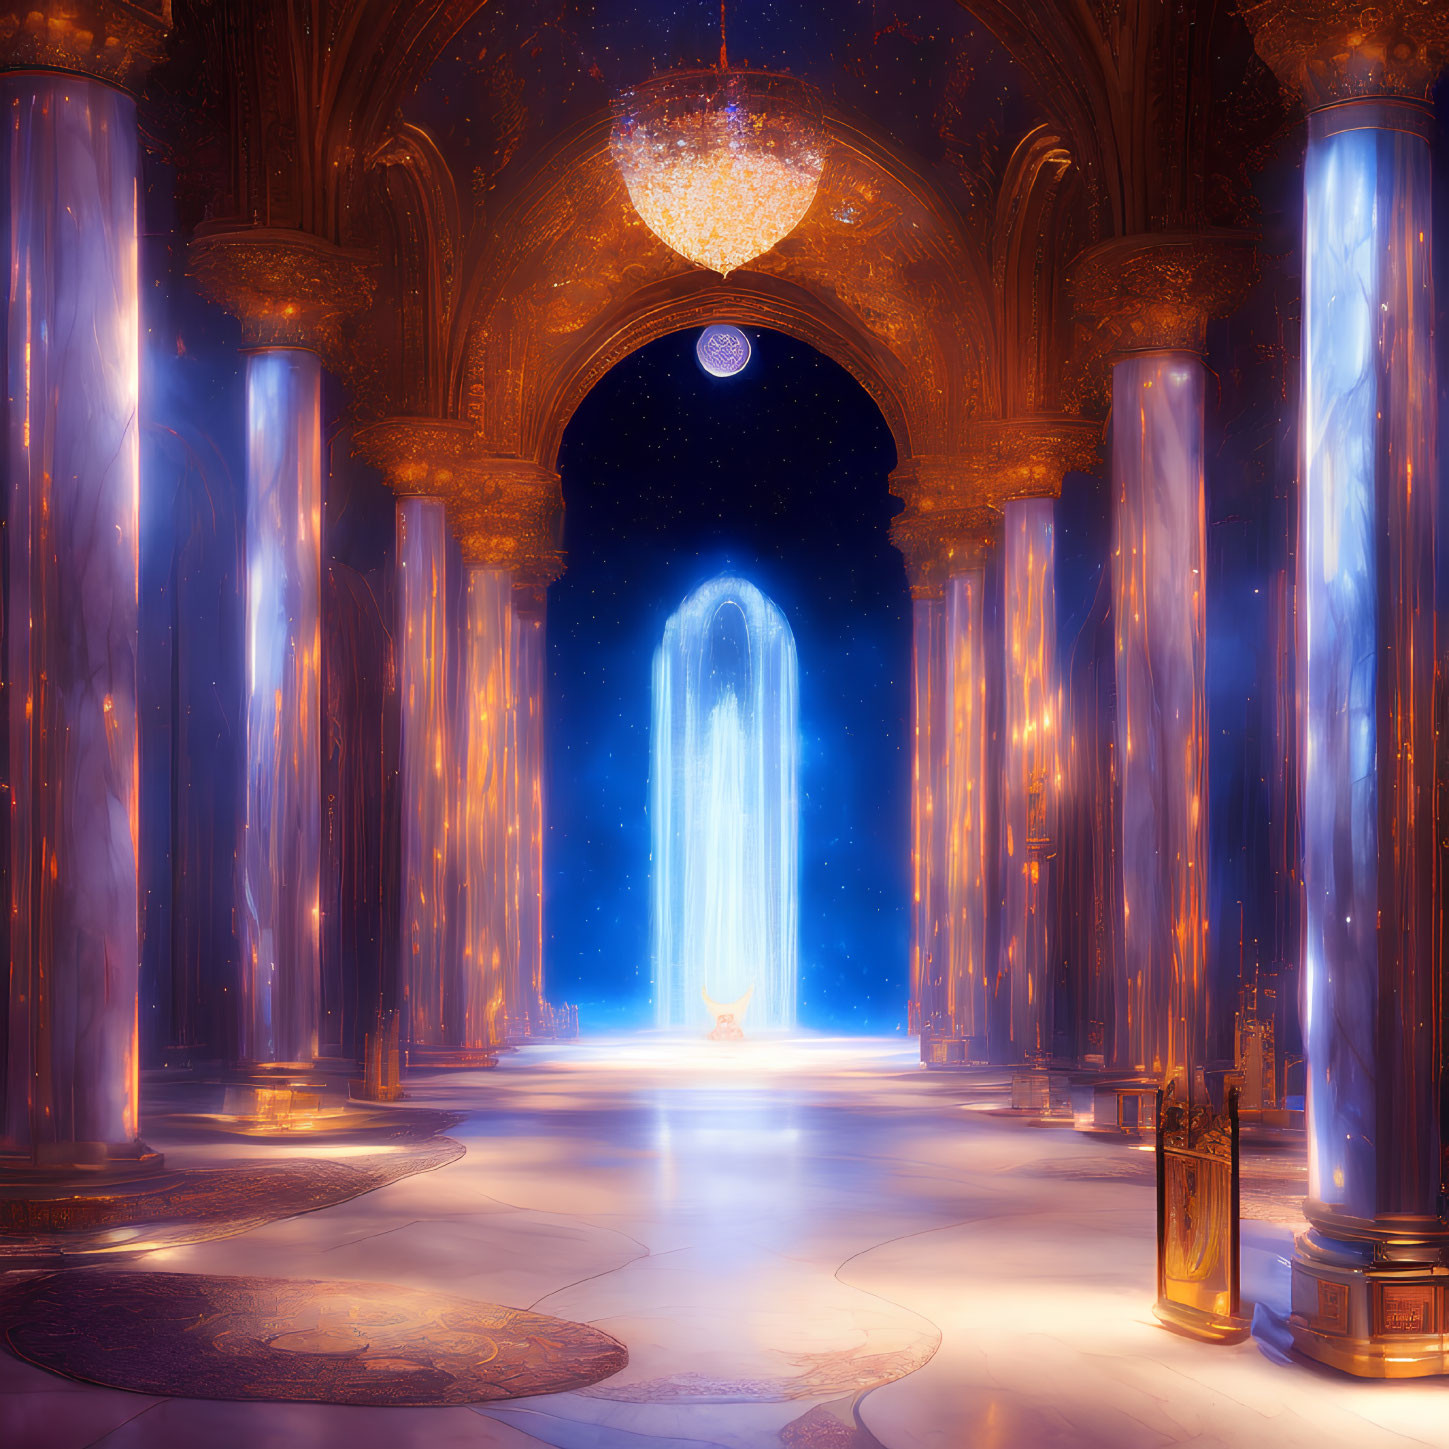 Fantasy palace interior with blue pillars, golden arches, chandelier, and mysterious portal